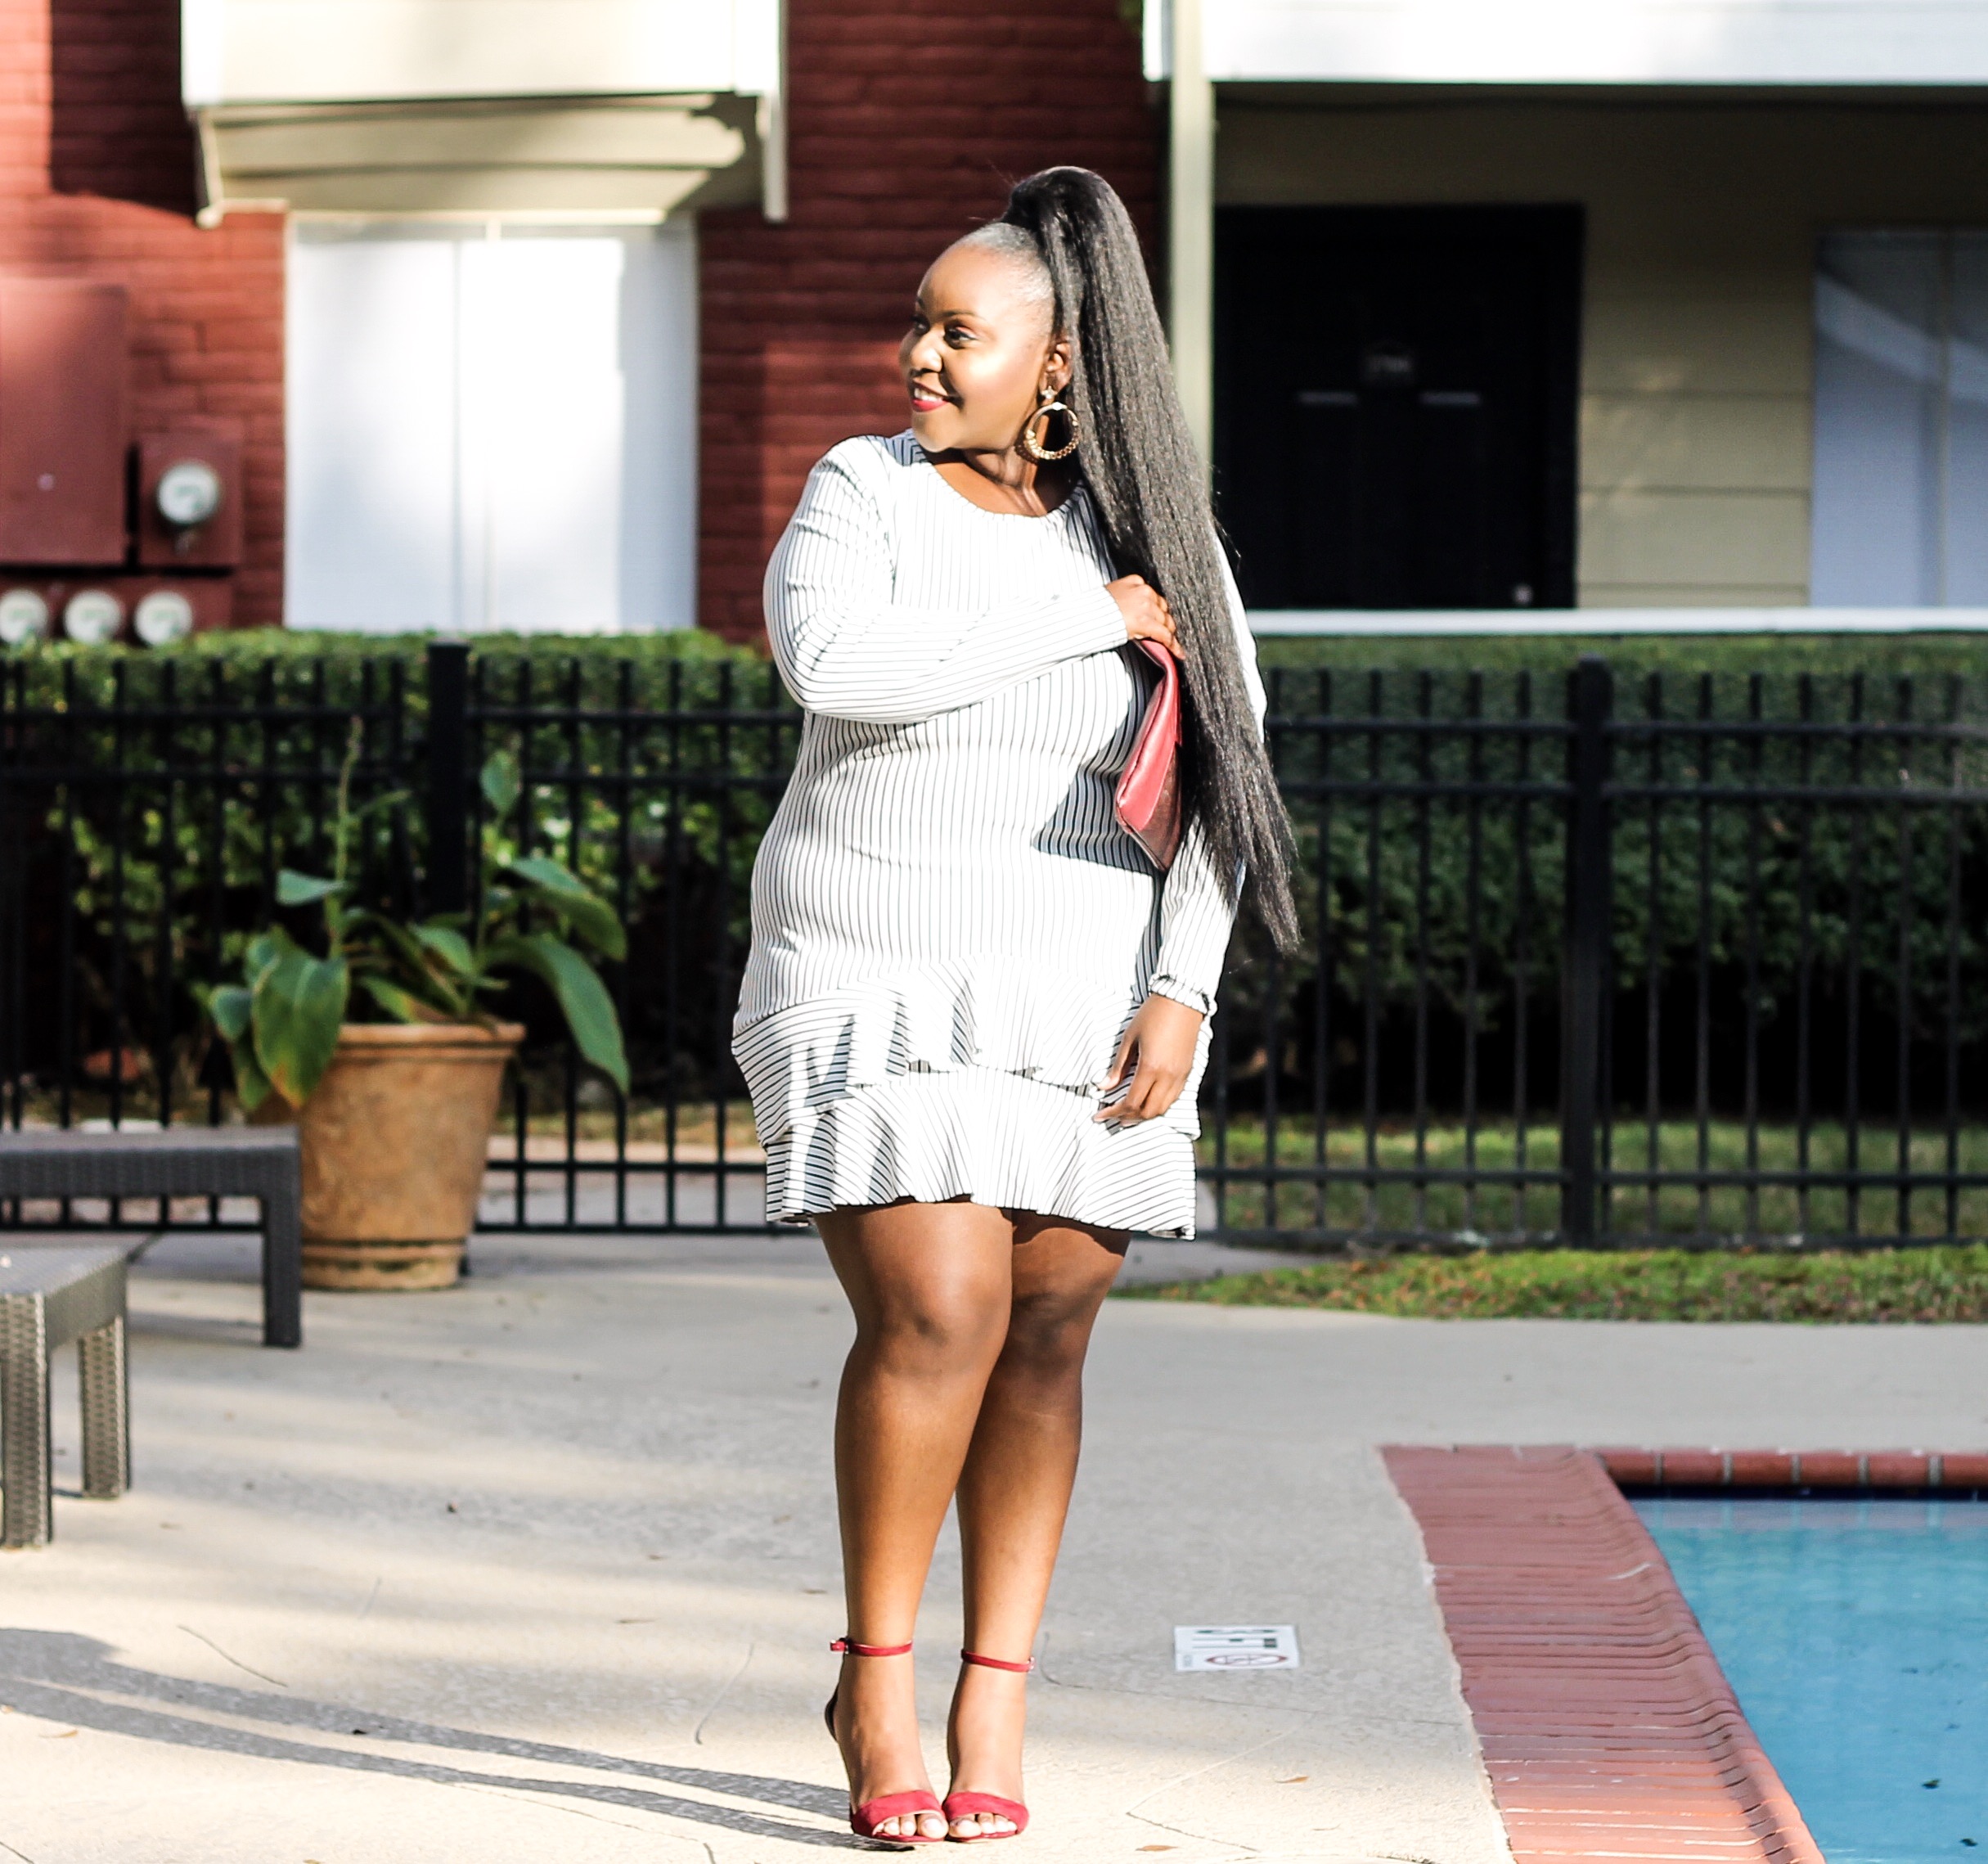 preppy plus size fashion blogs 2017, beautiful curvy girls, how to fill the eye brow of a dark skin, beautiful plus size dark skin girls, plus size black bloggers, clothes for curvy girls, curvy girl fashion clothing, plus blog, plus size fashion tips, plus size women blog, curvy women fashion, plus blog, curvy girl fashion blog, style plus curves, plus size fashion instagram, curvy girl blog, bbw blog, plus size street fashion, plus size beauty blog, plus size fashion ideas, curvy girl summer outfits, plus size fashion magazine, plus fashion bloggers, zara, Rosie the riveter shirt; Emilia embroidered beaded clutch; Vince Camuto heels; Lula shell drop earrings; Aldo Galigossi sunnies, GABRIELLE UNION COLLECTION - STRIPED KIMONO DRESS, new york & company,